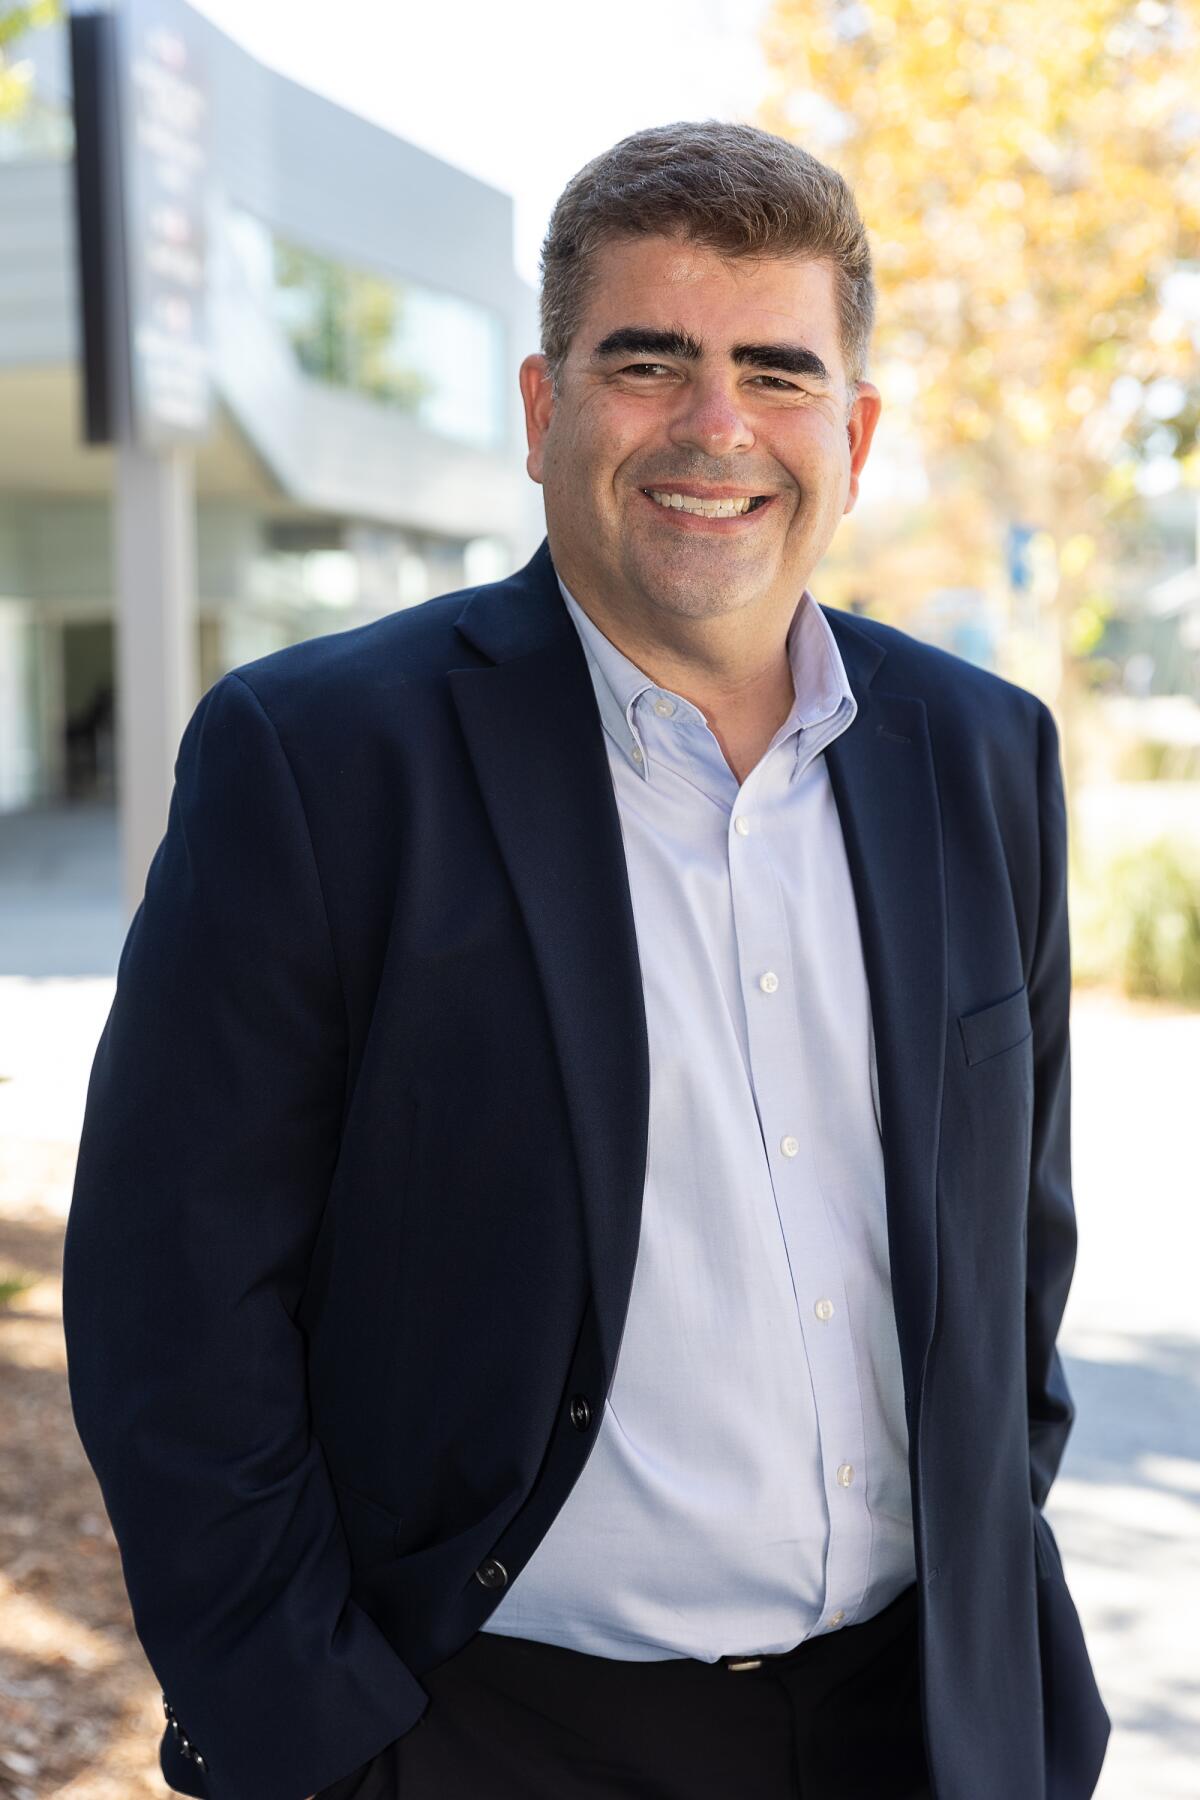 Gabriel Buelna, 50, is vying to keep his seat on the Los Angeles Community College District Board of Trustees.